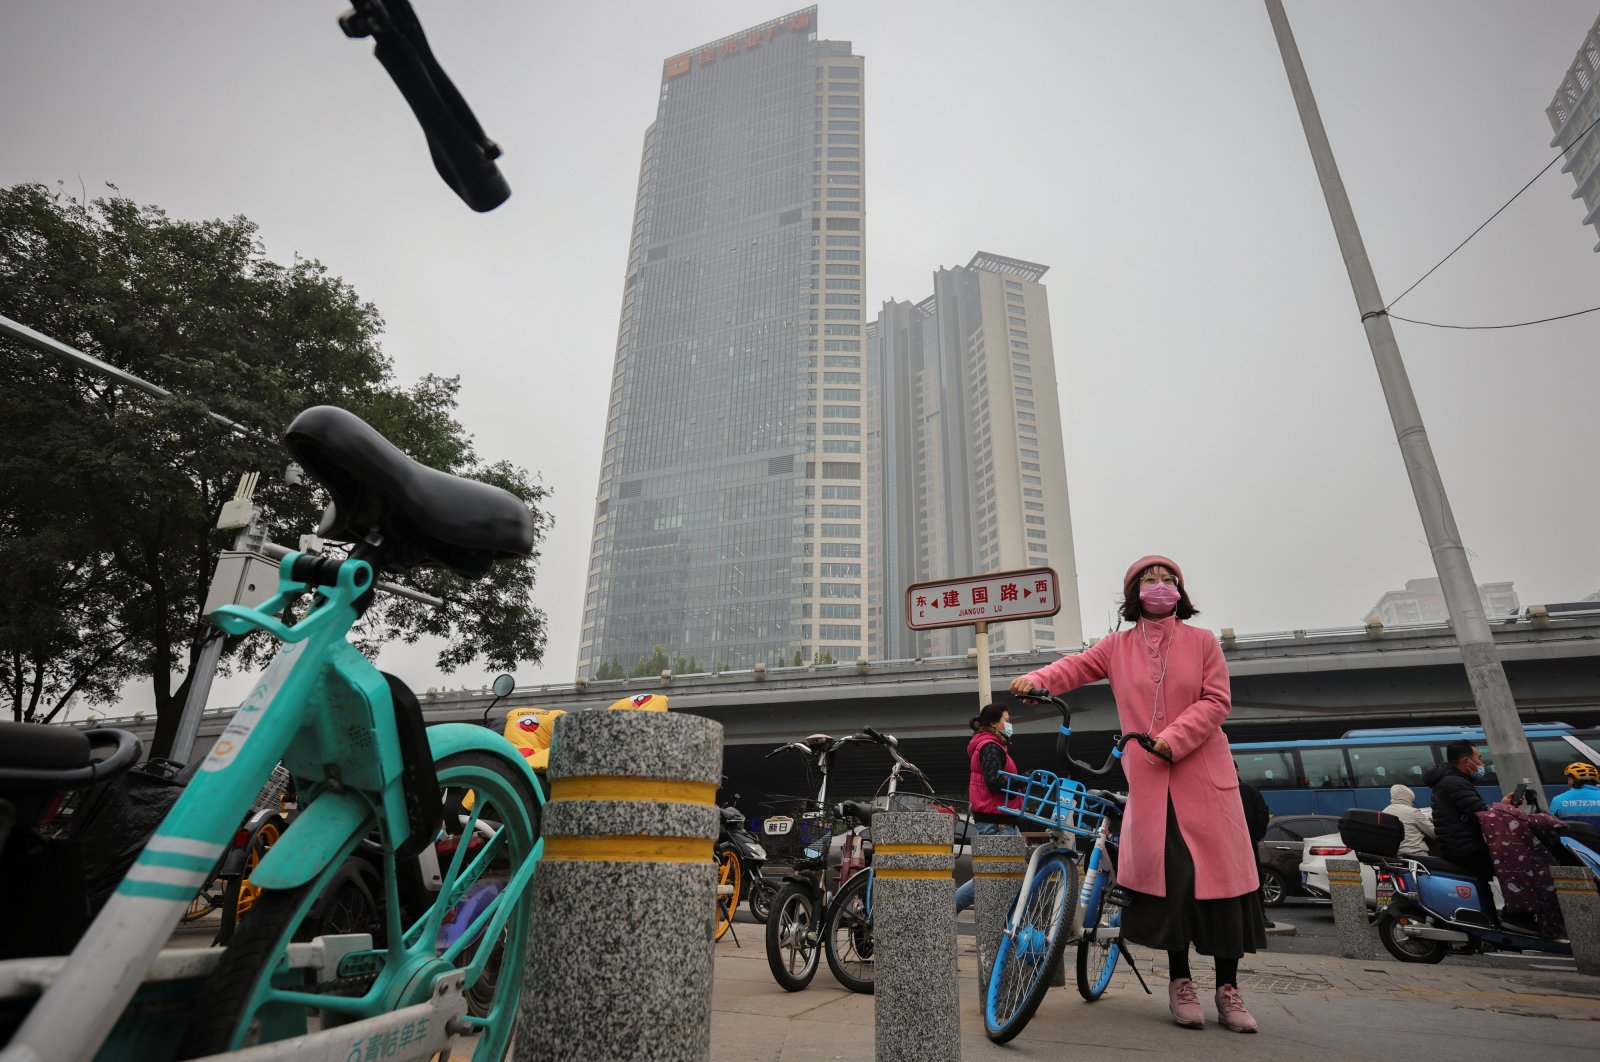 A woman pushes a bike in front of the Kaisa Plaza developed by Kaisa Group Holdings Ltd on a hazy day in Beijing, China, Nov. 5, 2021. (Reuters Photo)